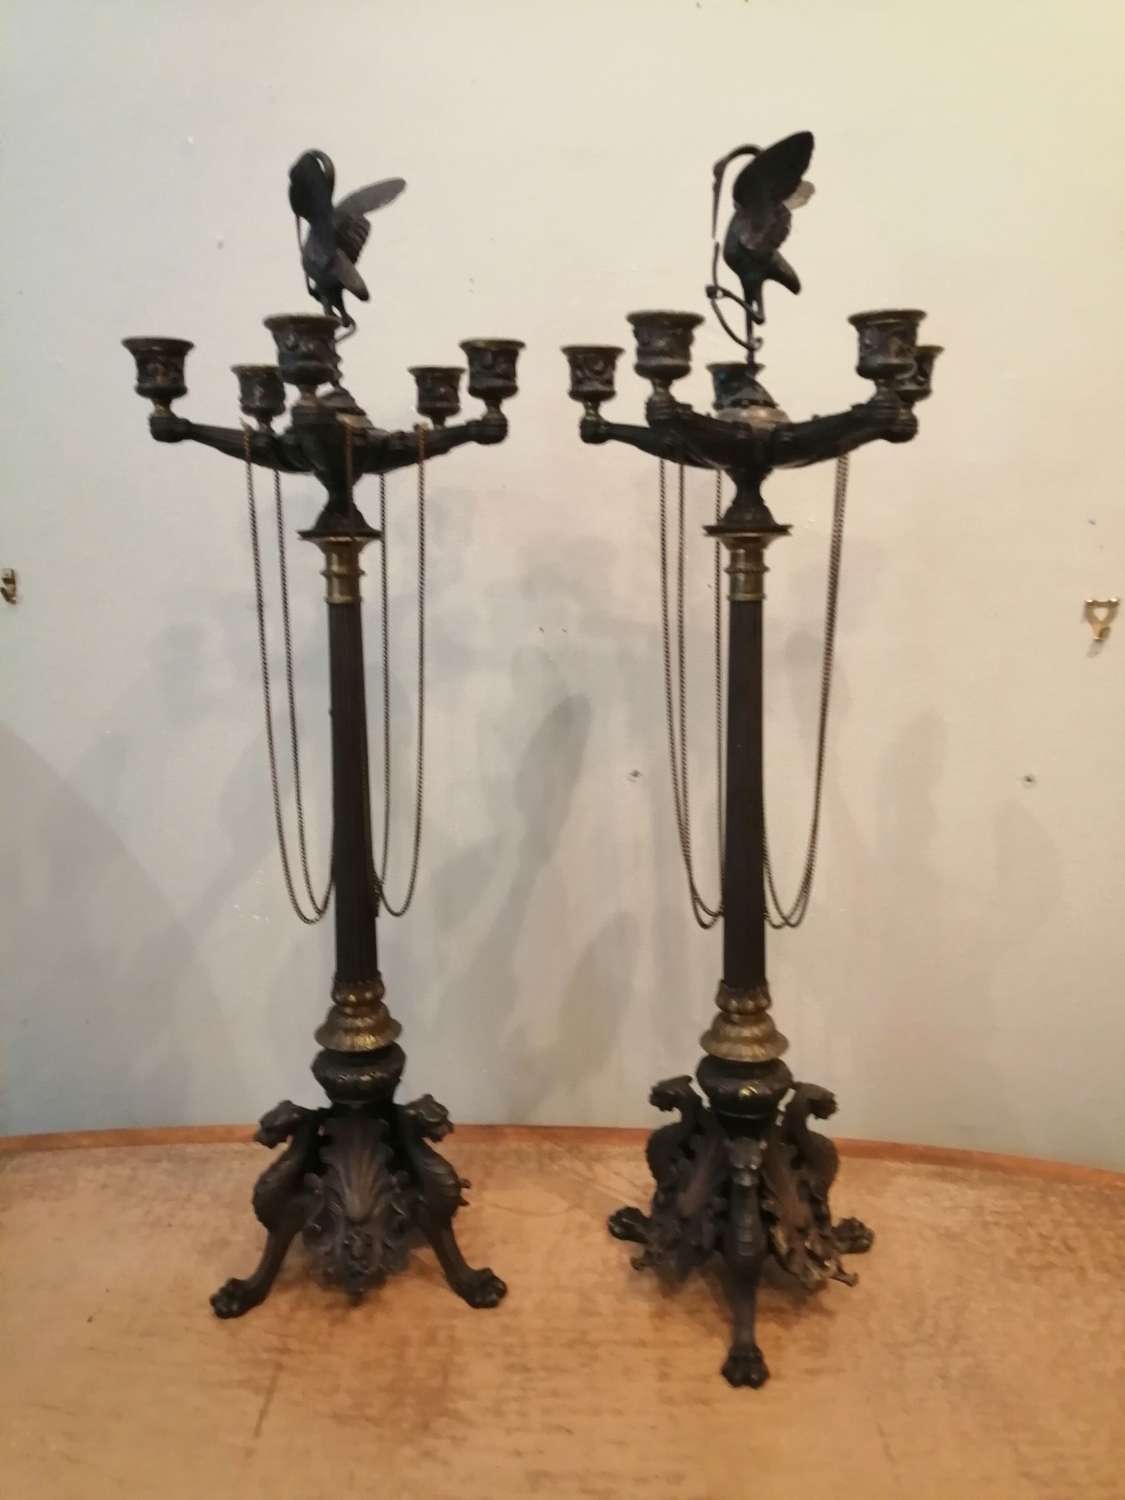 A fine pair of French Regency period tall candelabra